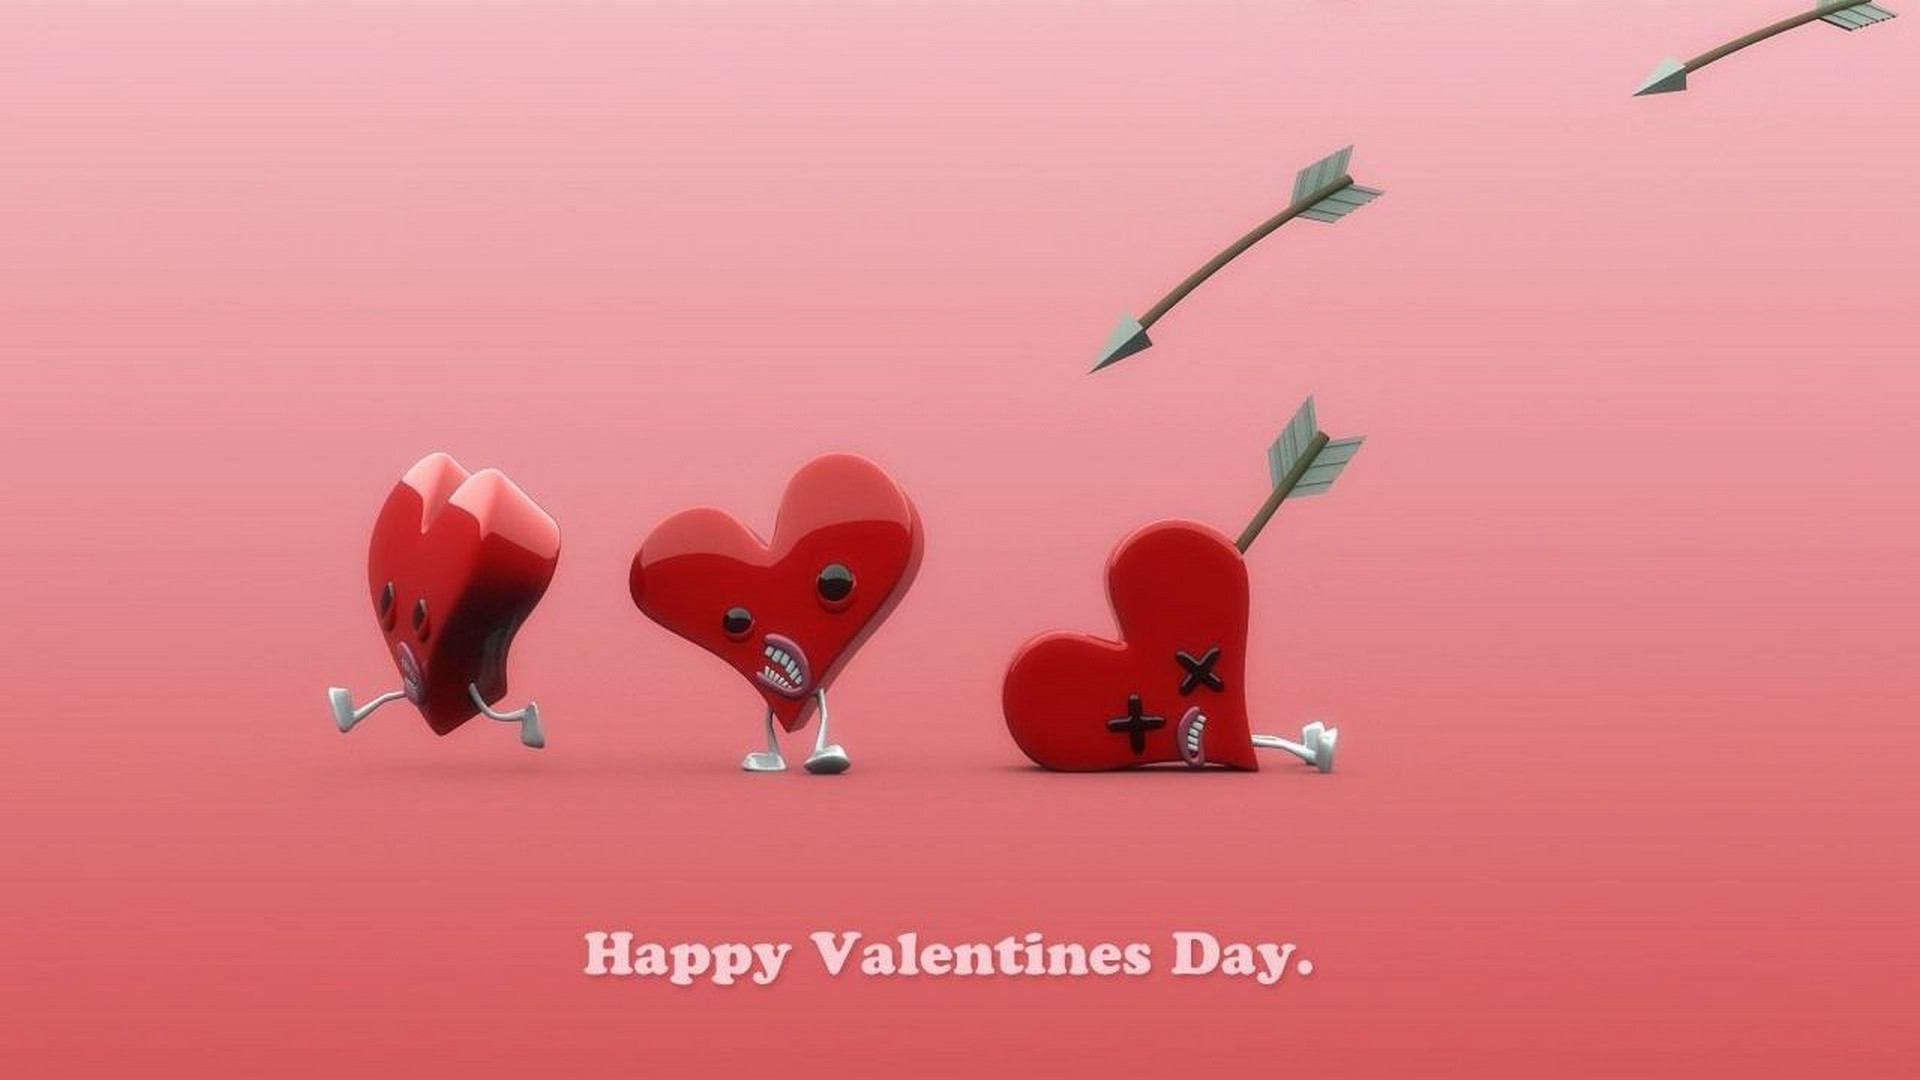 Free download Animated Valentines Day Wallpaper 2020 Cute Wallpaper [1920x1080] for your Desktop, Mobile & Tablet. Explore Valentine's Day 2020 HD Wallpaper. Valentine's Day 2020 HD Wallpaper, Happy Valentine's